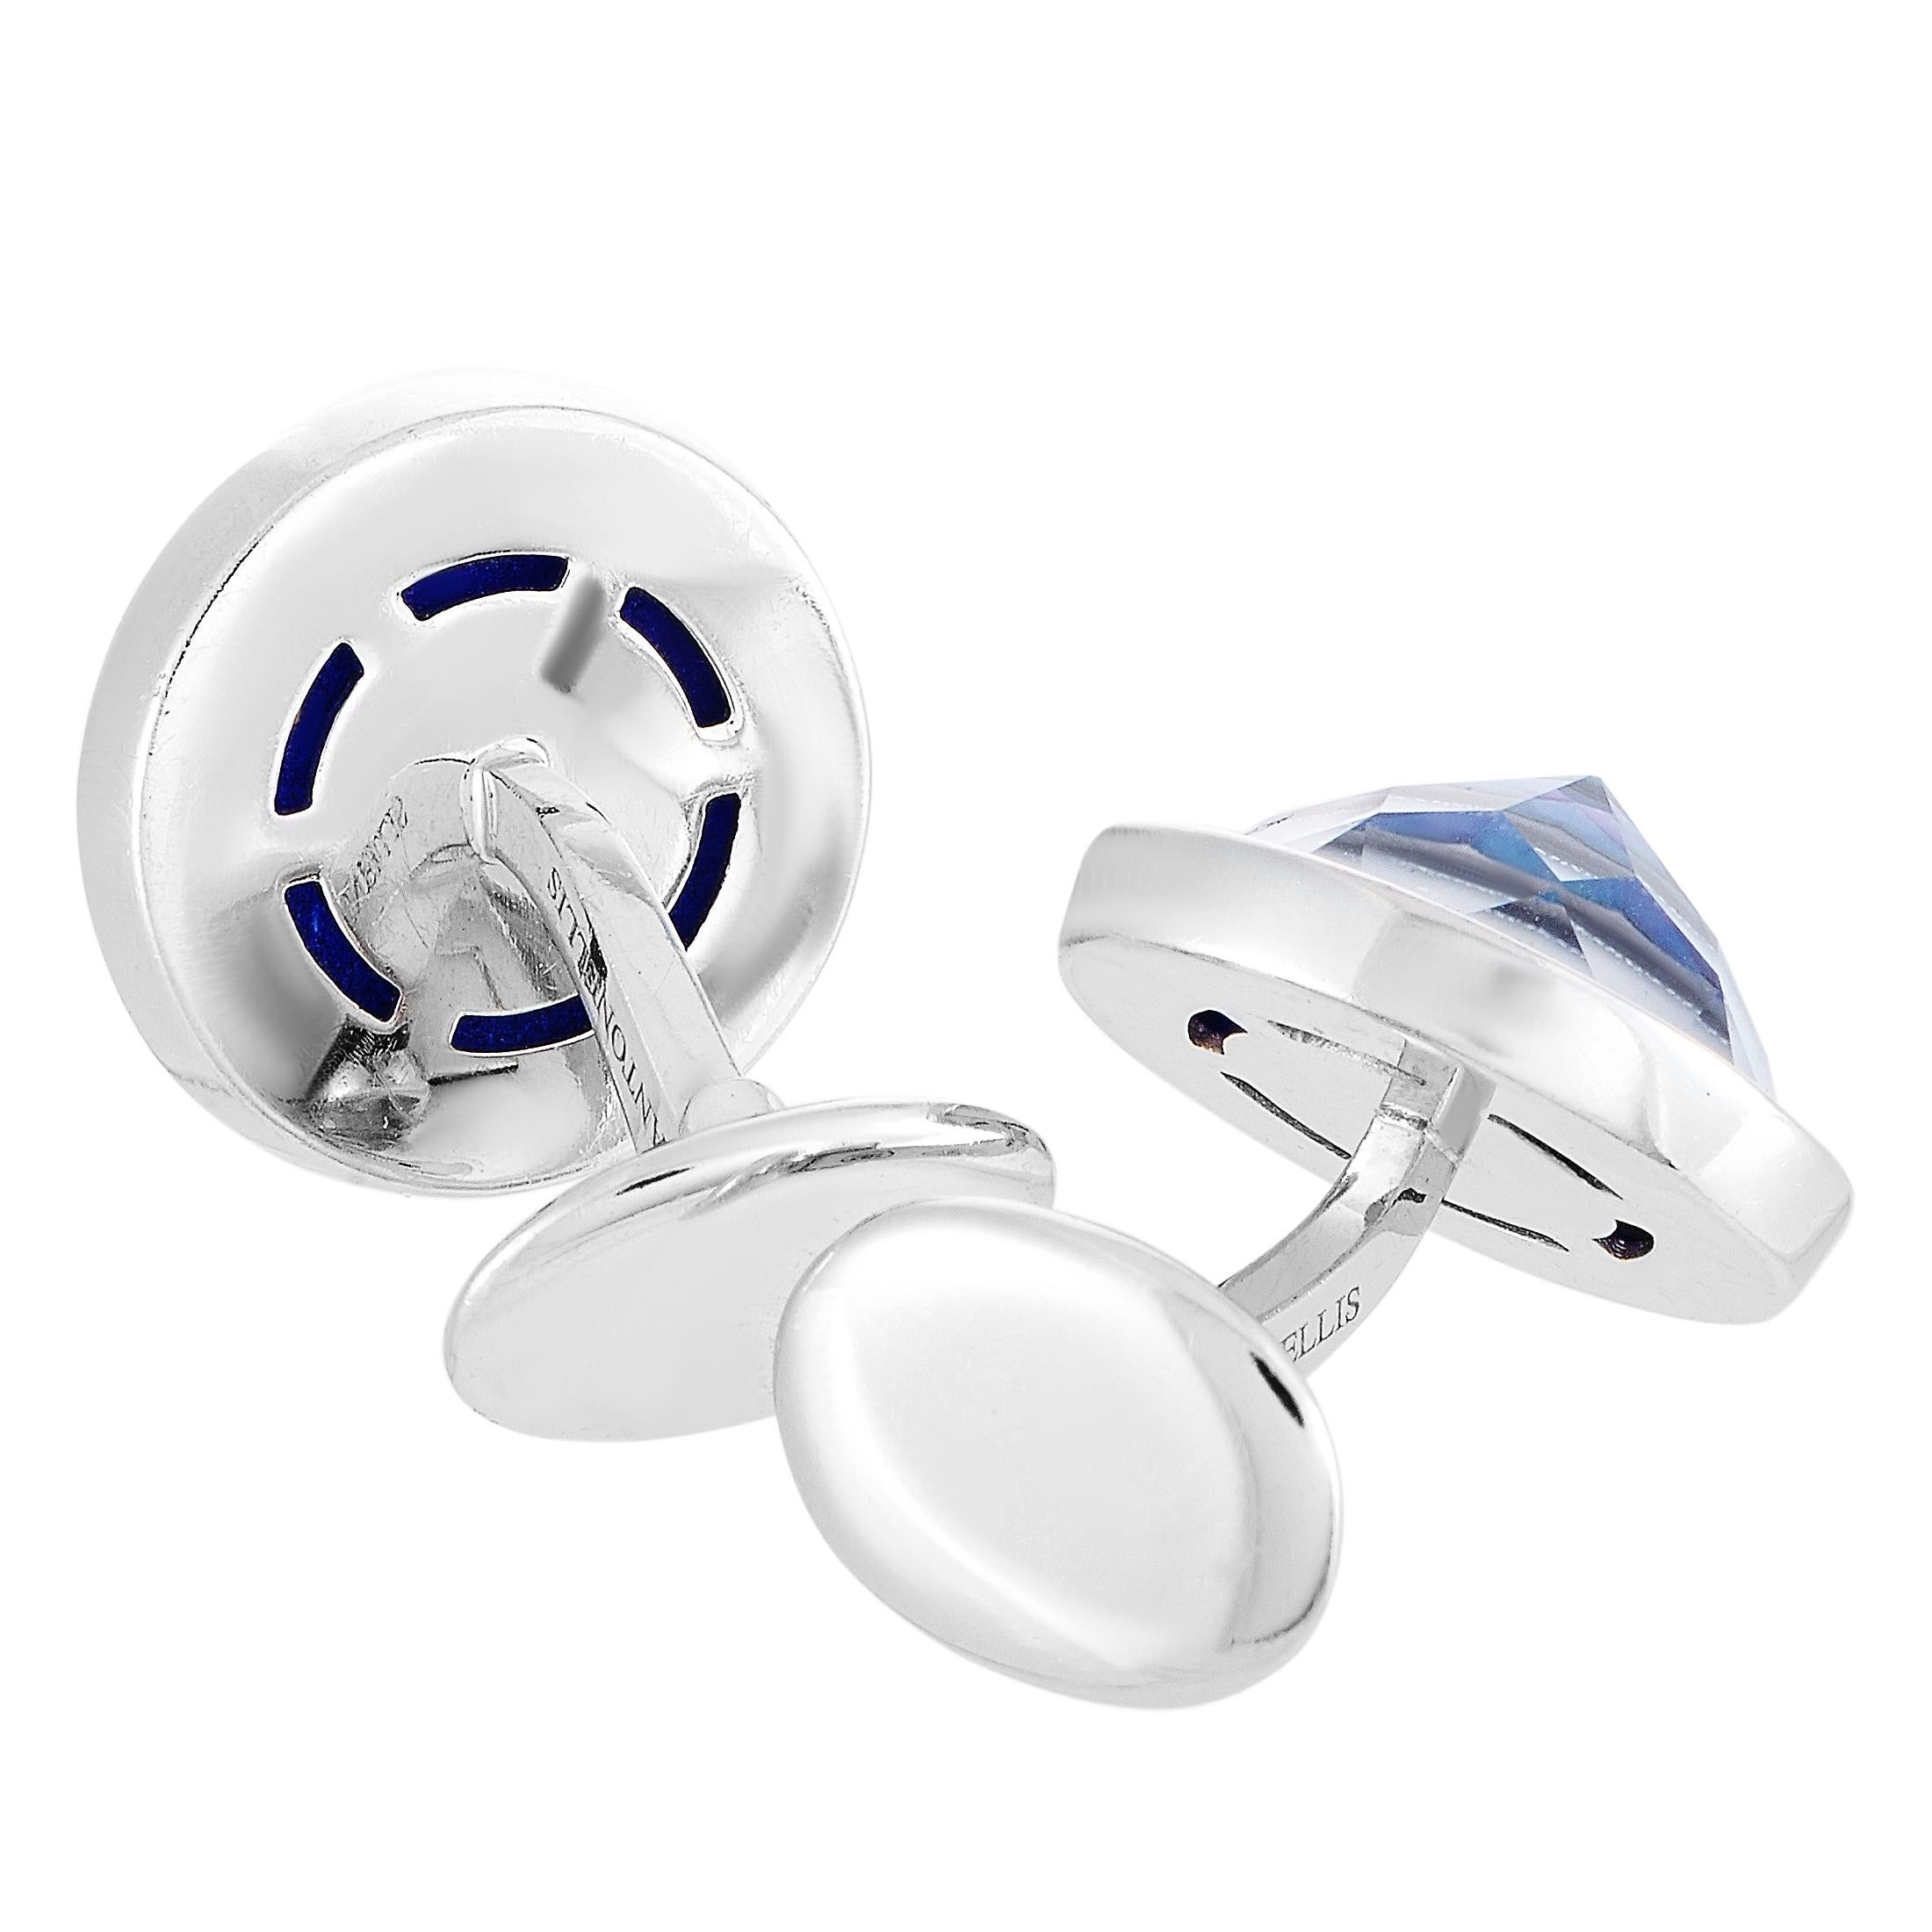 These Antonellis cufflinks are made out of 18K white gold and mother of pearl and each of the two weighs 8 grams. The cufflinks measure 0.65” in length and 0.65” in width.
 
 The pair is offered in brand new condition and includes a gift box.